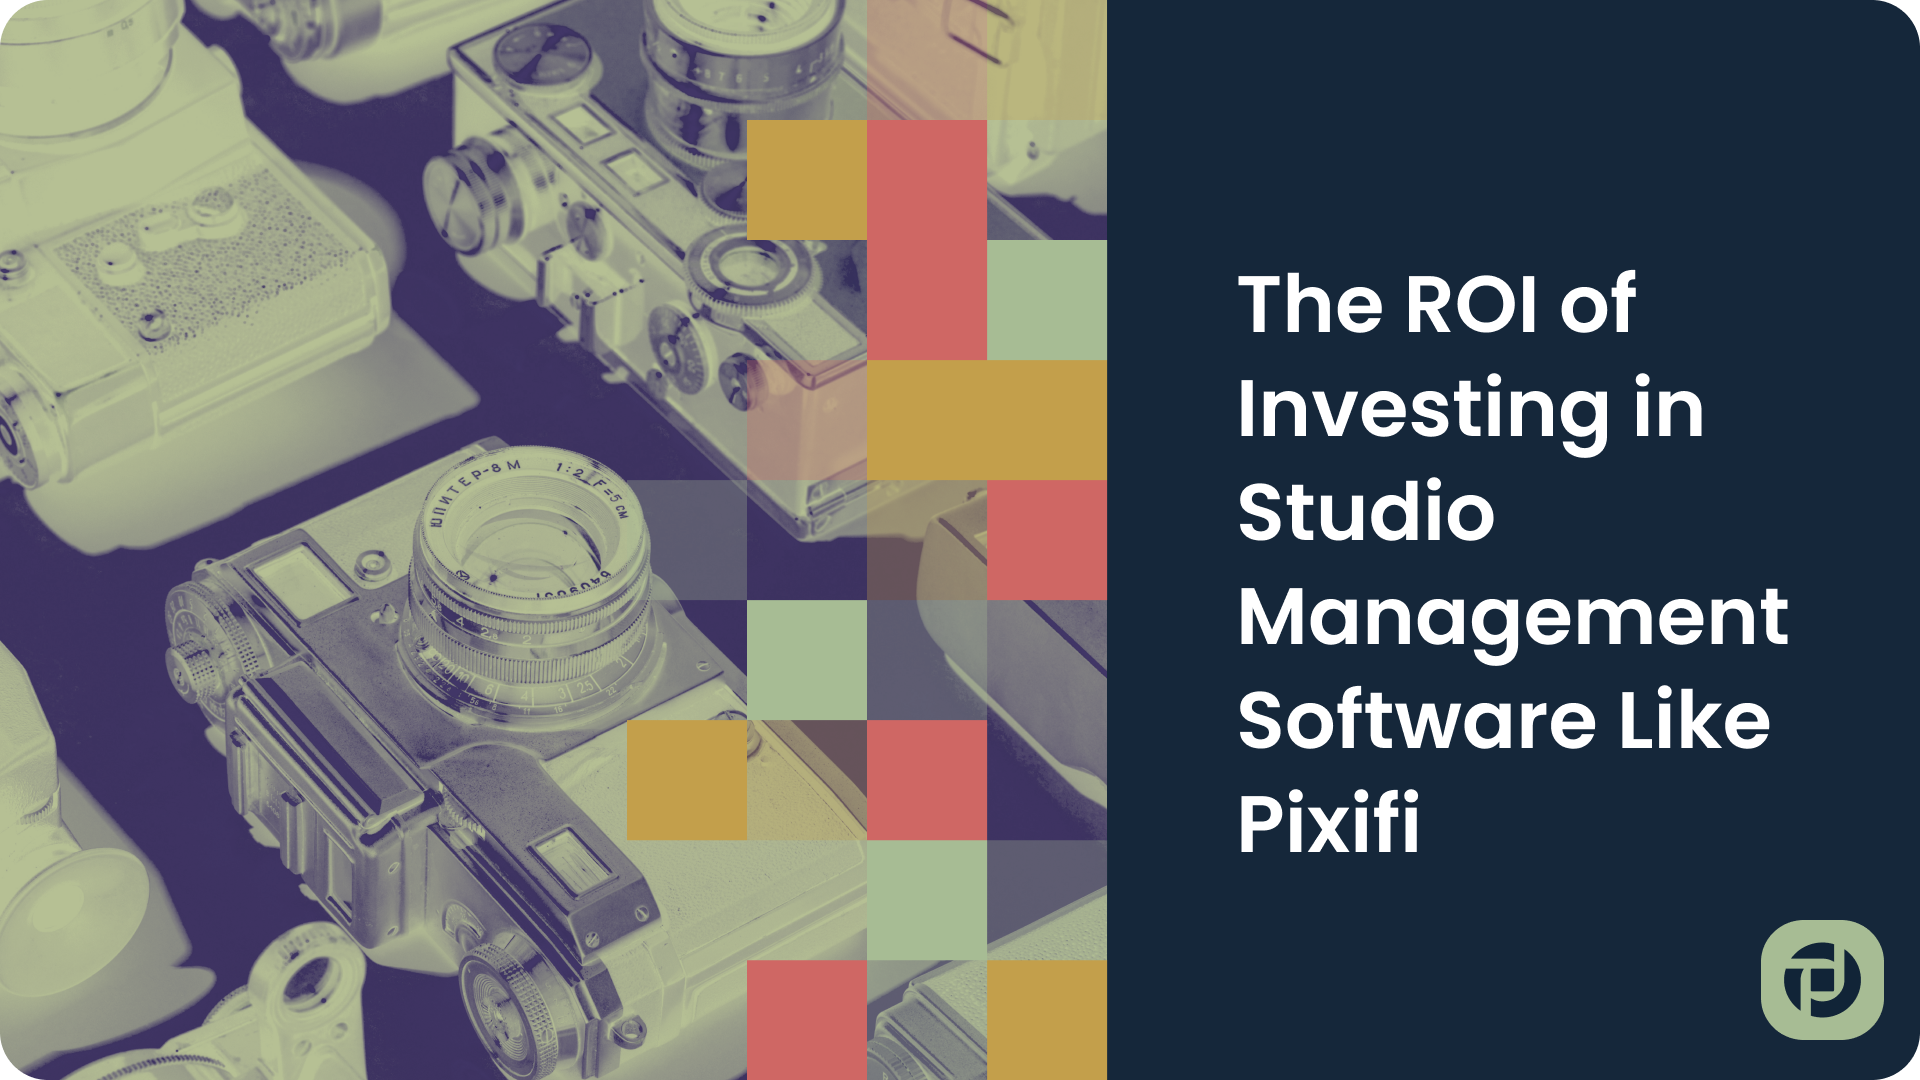 The ROI of Investing in Studio Management Software Like Pixifi